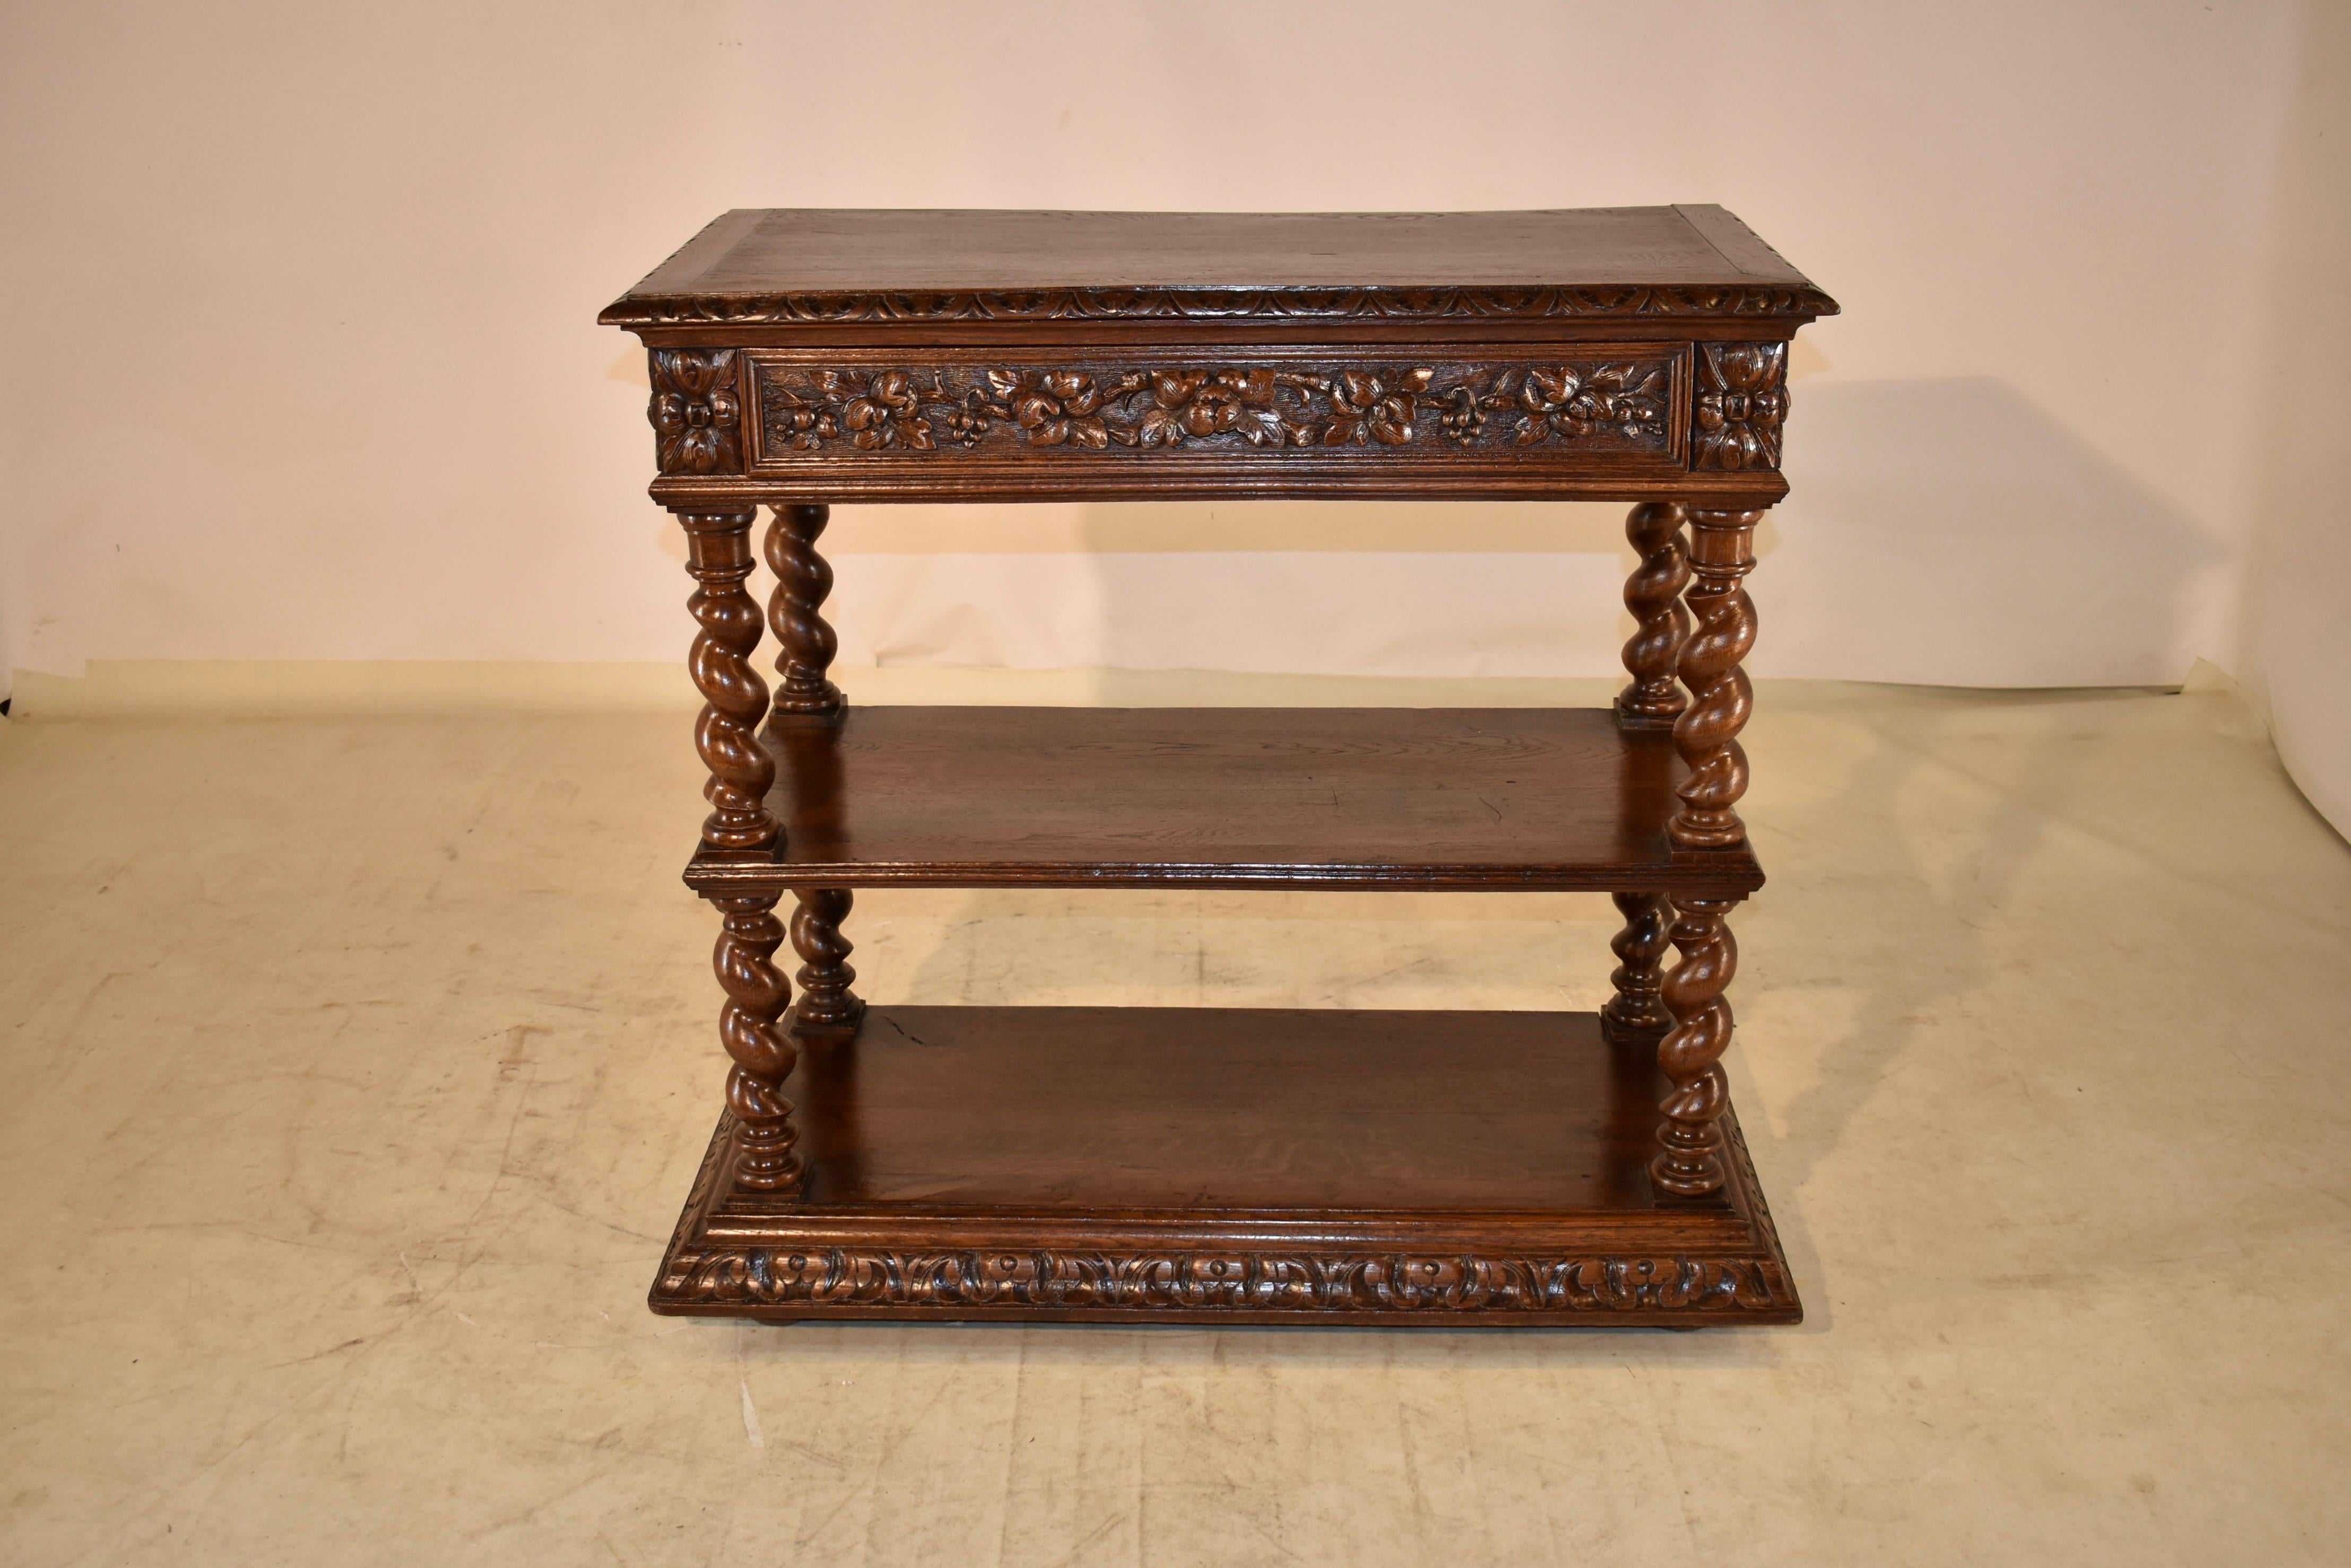 19th century oak dessert buffet from France with a banded edge around the top , which also features a beveled and hand carved decorated edge. The top lifts to reveal another top, which can be used for serving. The sides are paneled, as well as the